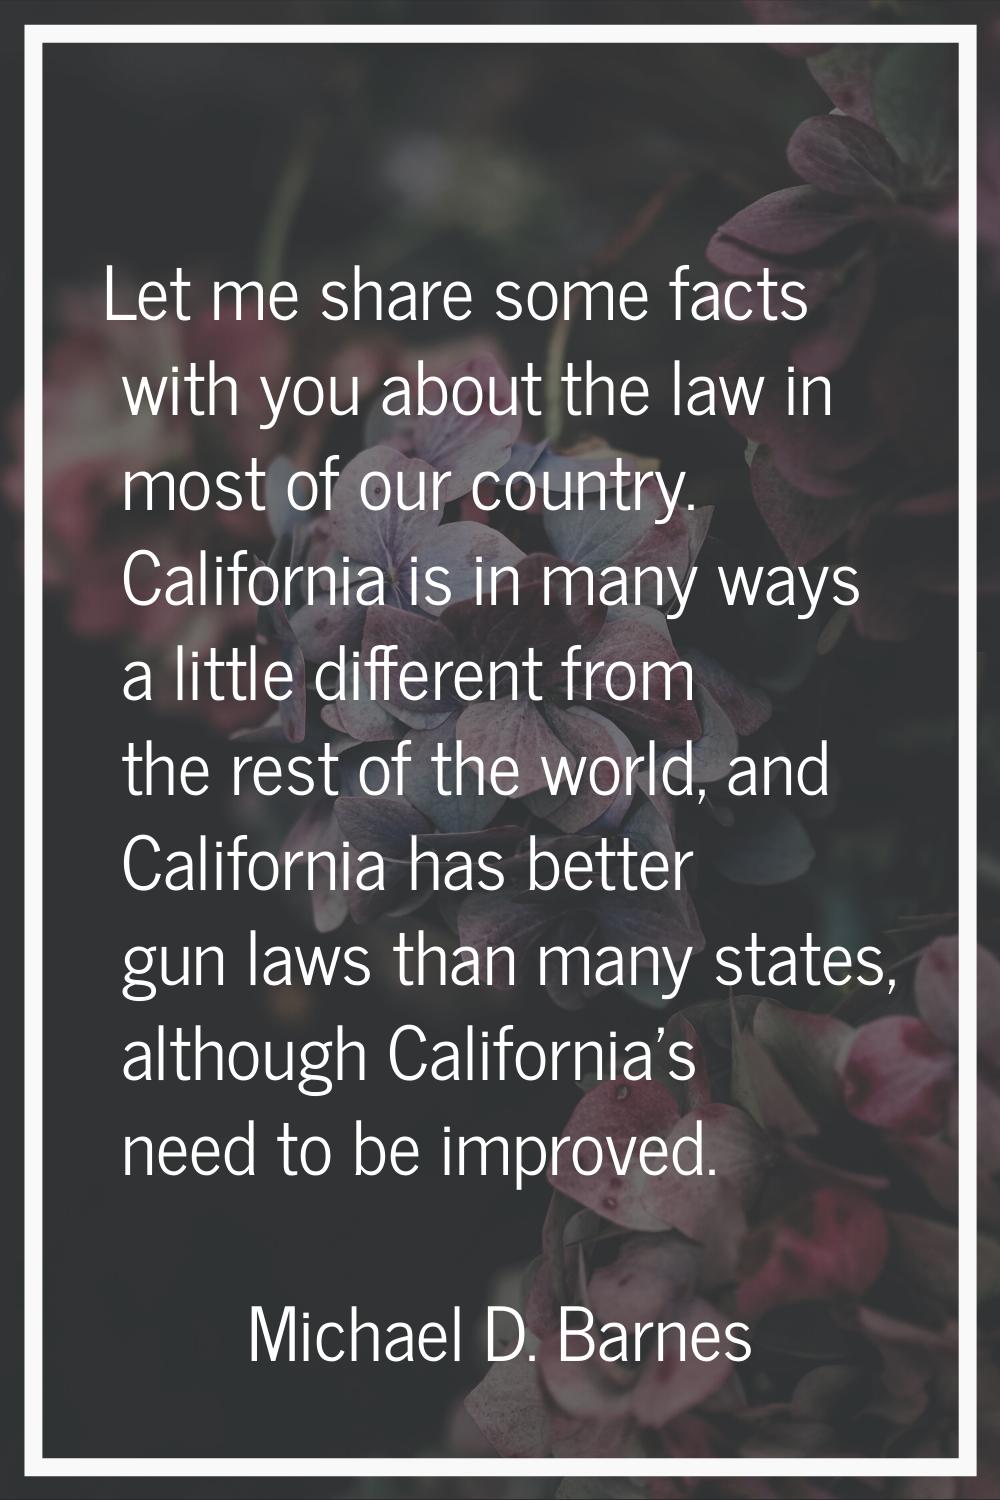 Let me share some facts with you about the law in most of our country. California is in many ways a